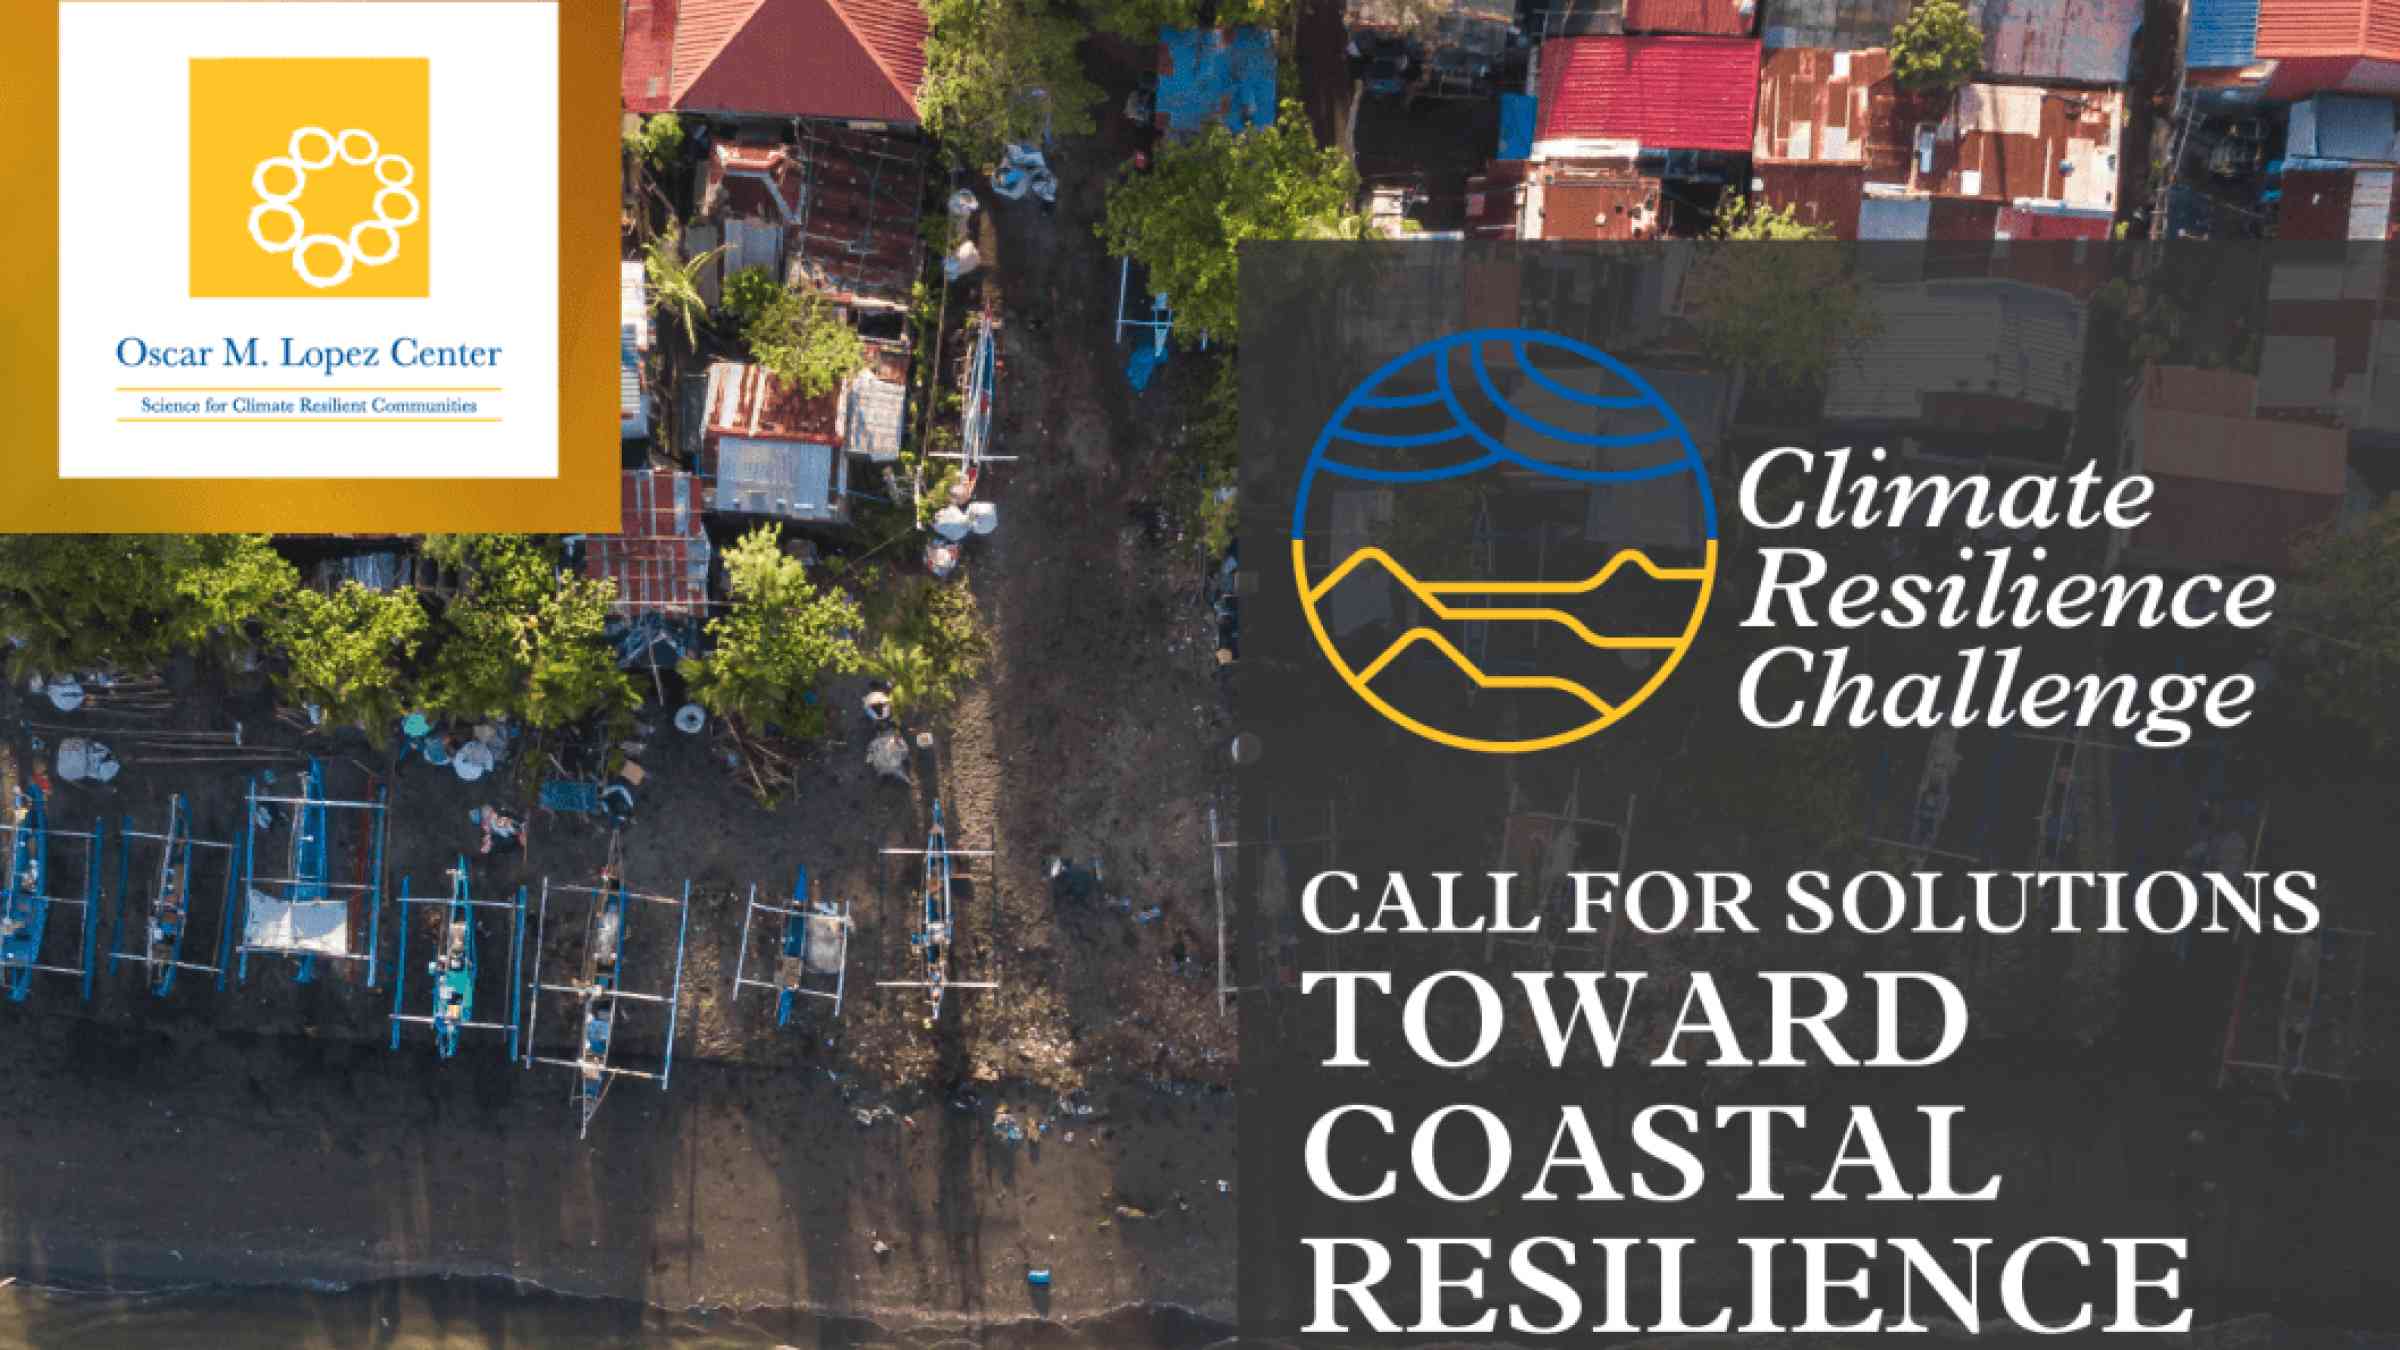 Banner of the Oscar M. Lopez Center's Climate Resilience Challenge